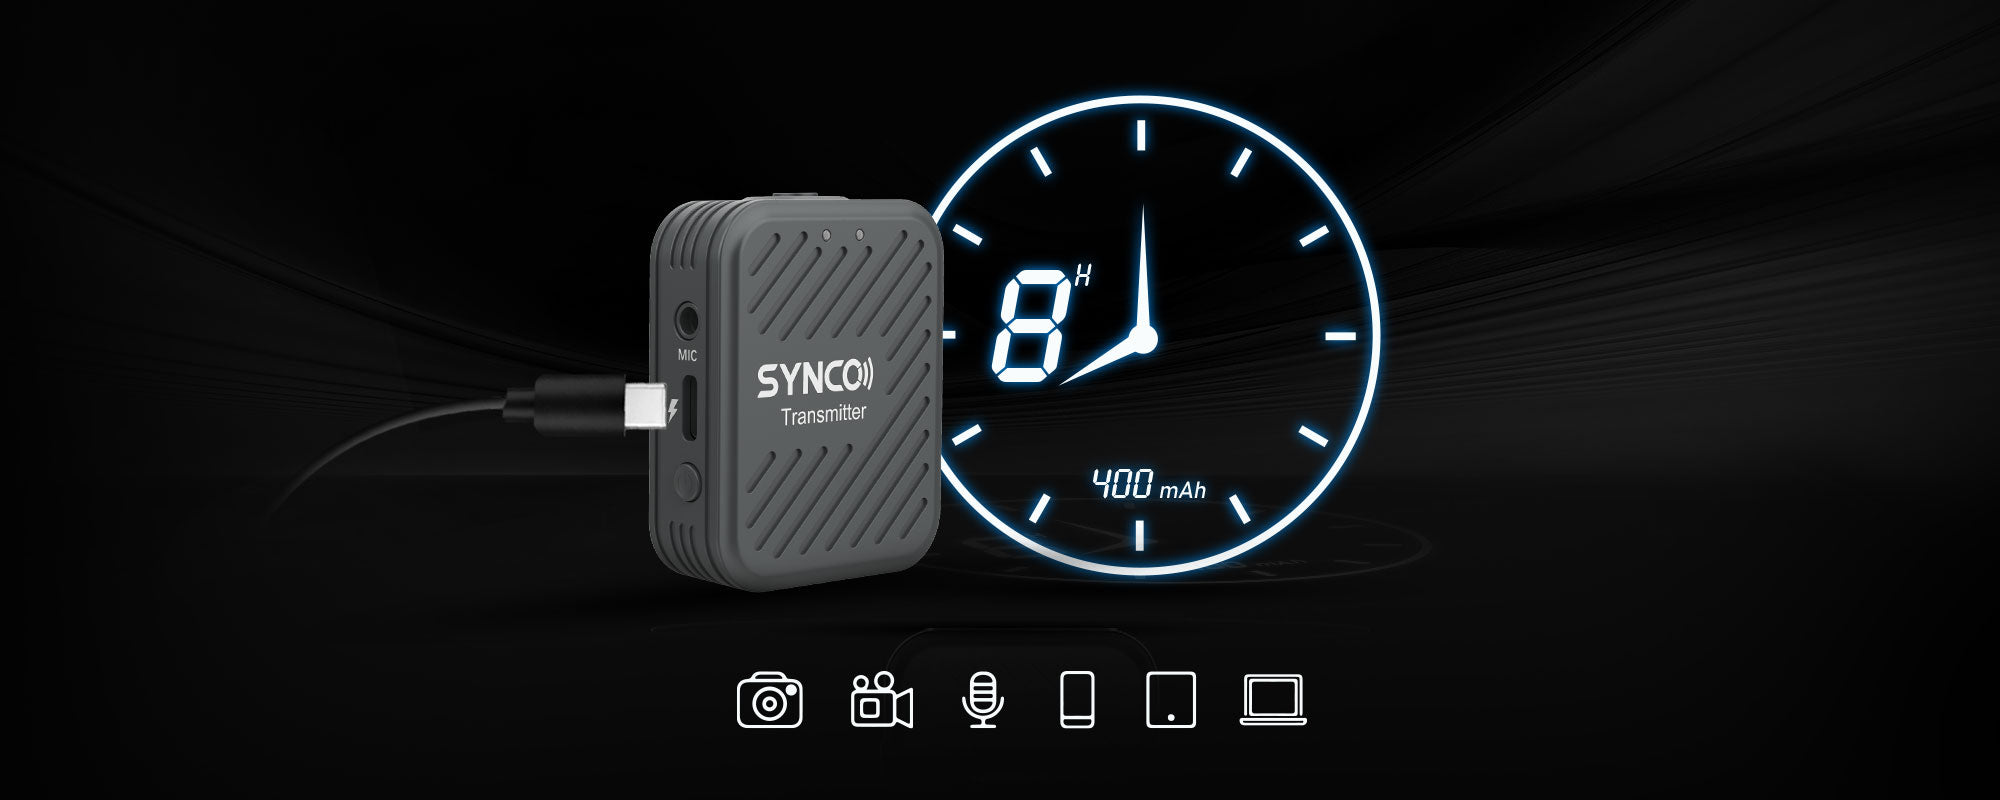 SYNCO G1(A2) rechargeable wireless microphone system is compatible with cameras and mobile devices. It supports recording of 8 hours with 400mAh battery.